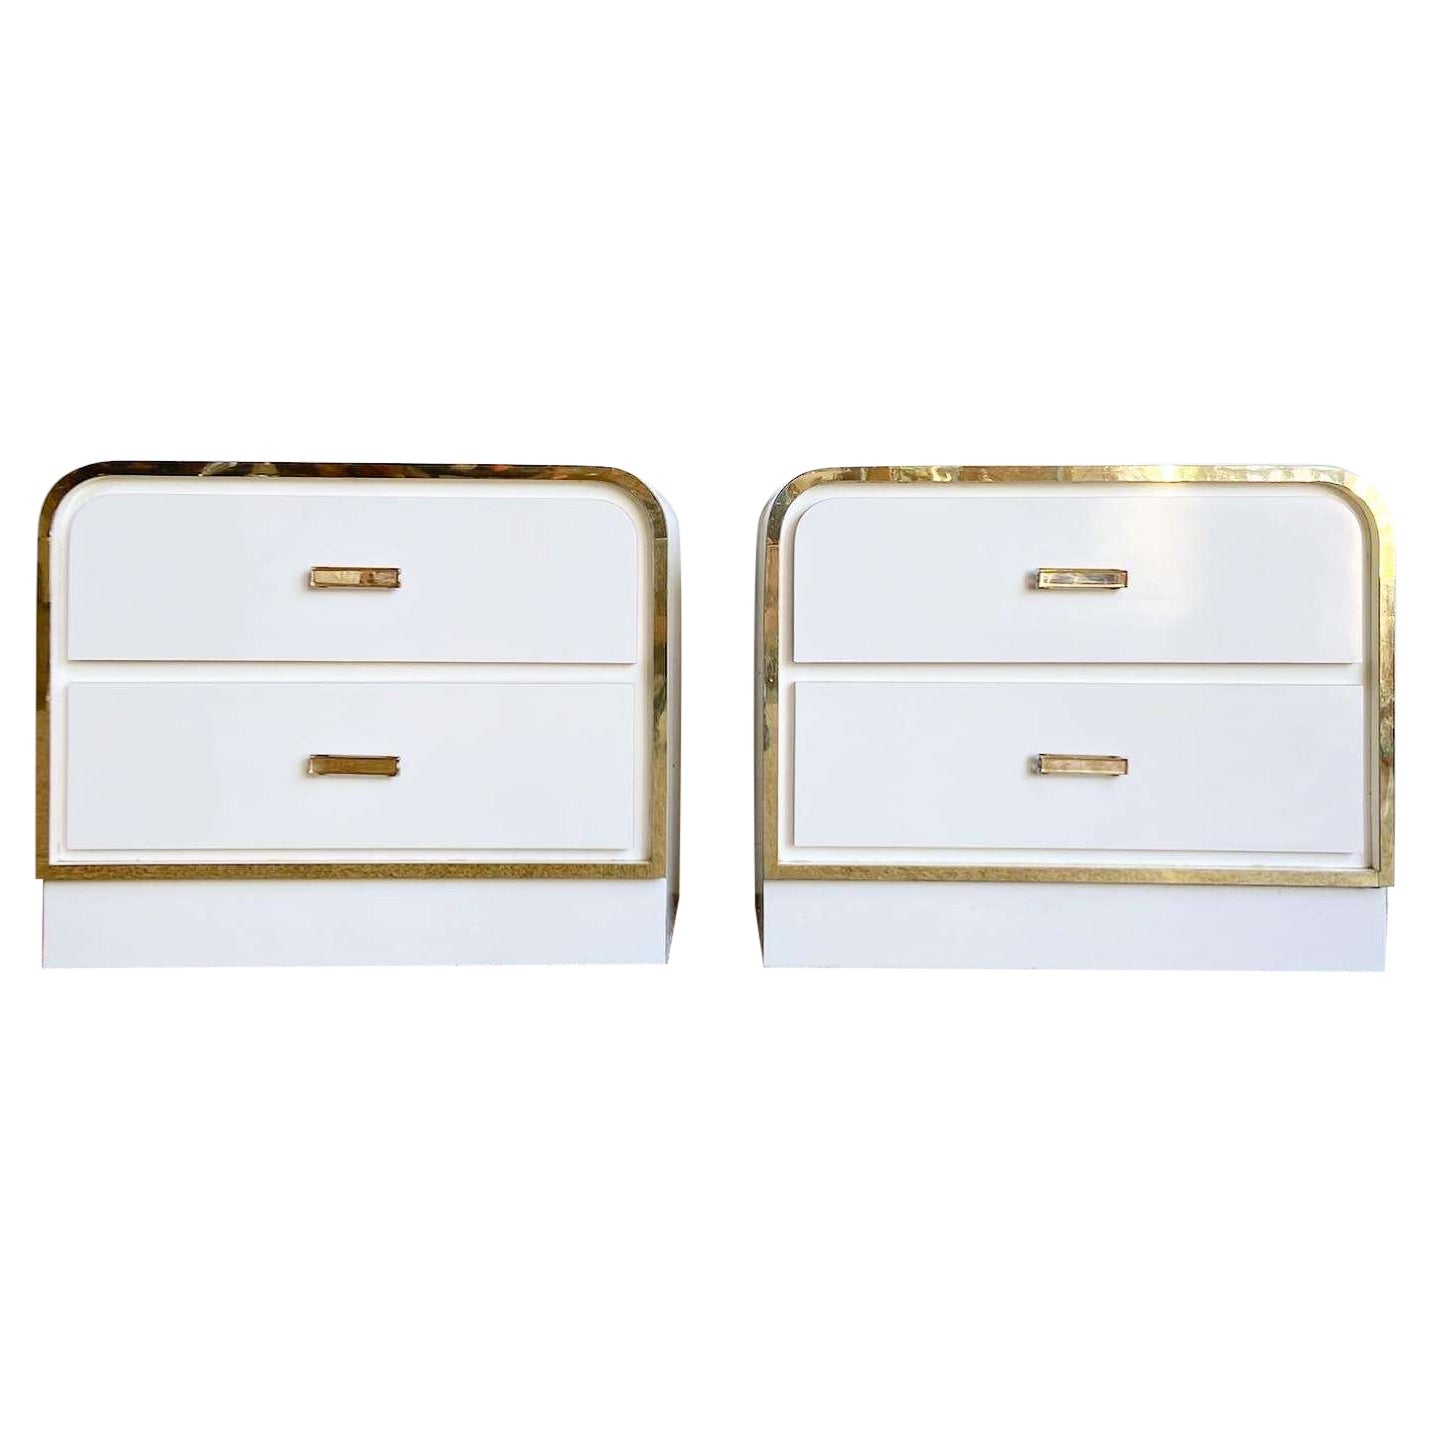 Postmodern White Lacquer Laminate Waterfall Nightstands W/ Gold Accents - a Pair